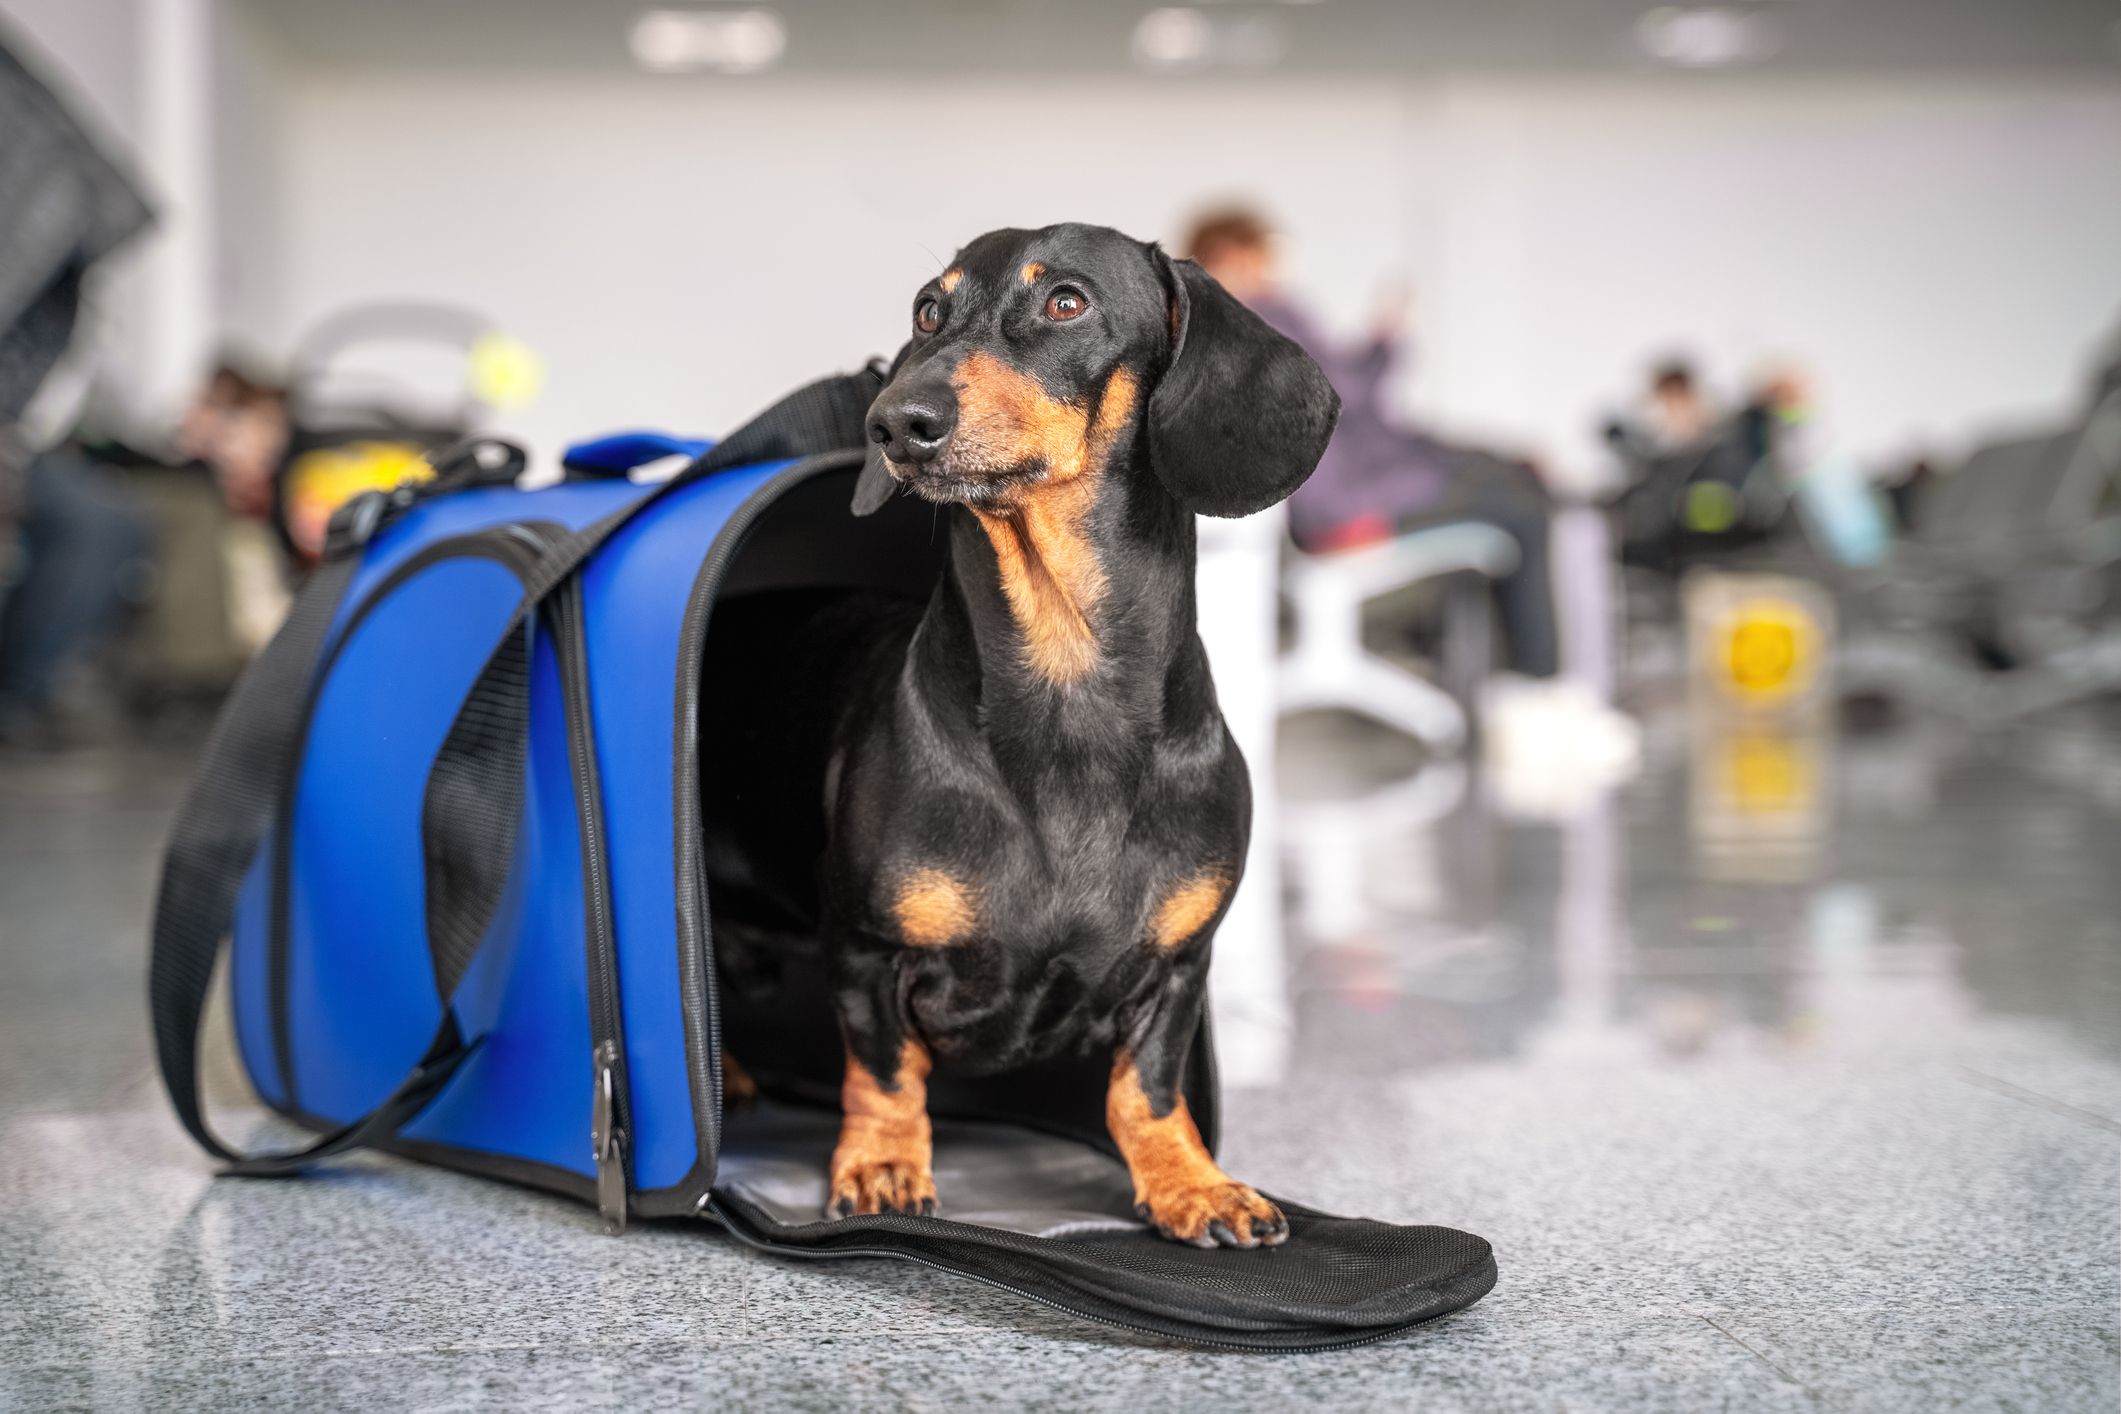 https://hips.hearstapps.com/hmg-prod/images/obedient-dachshund-dog-sits-in-blue-pet-carrier-in-royalty-free-image-1688166535.jpg